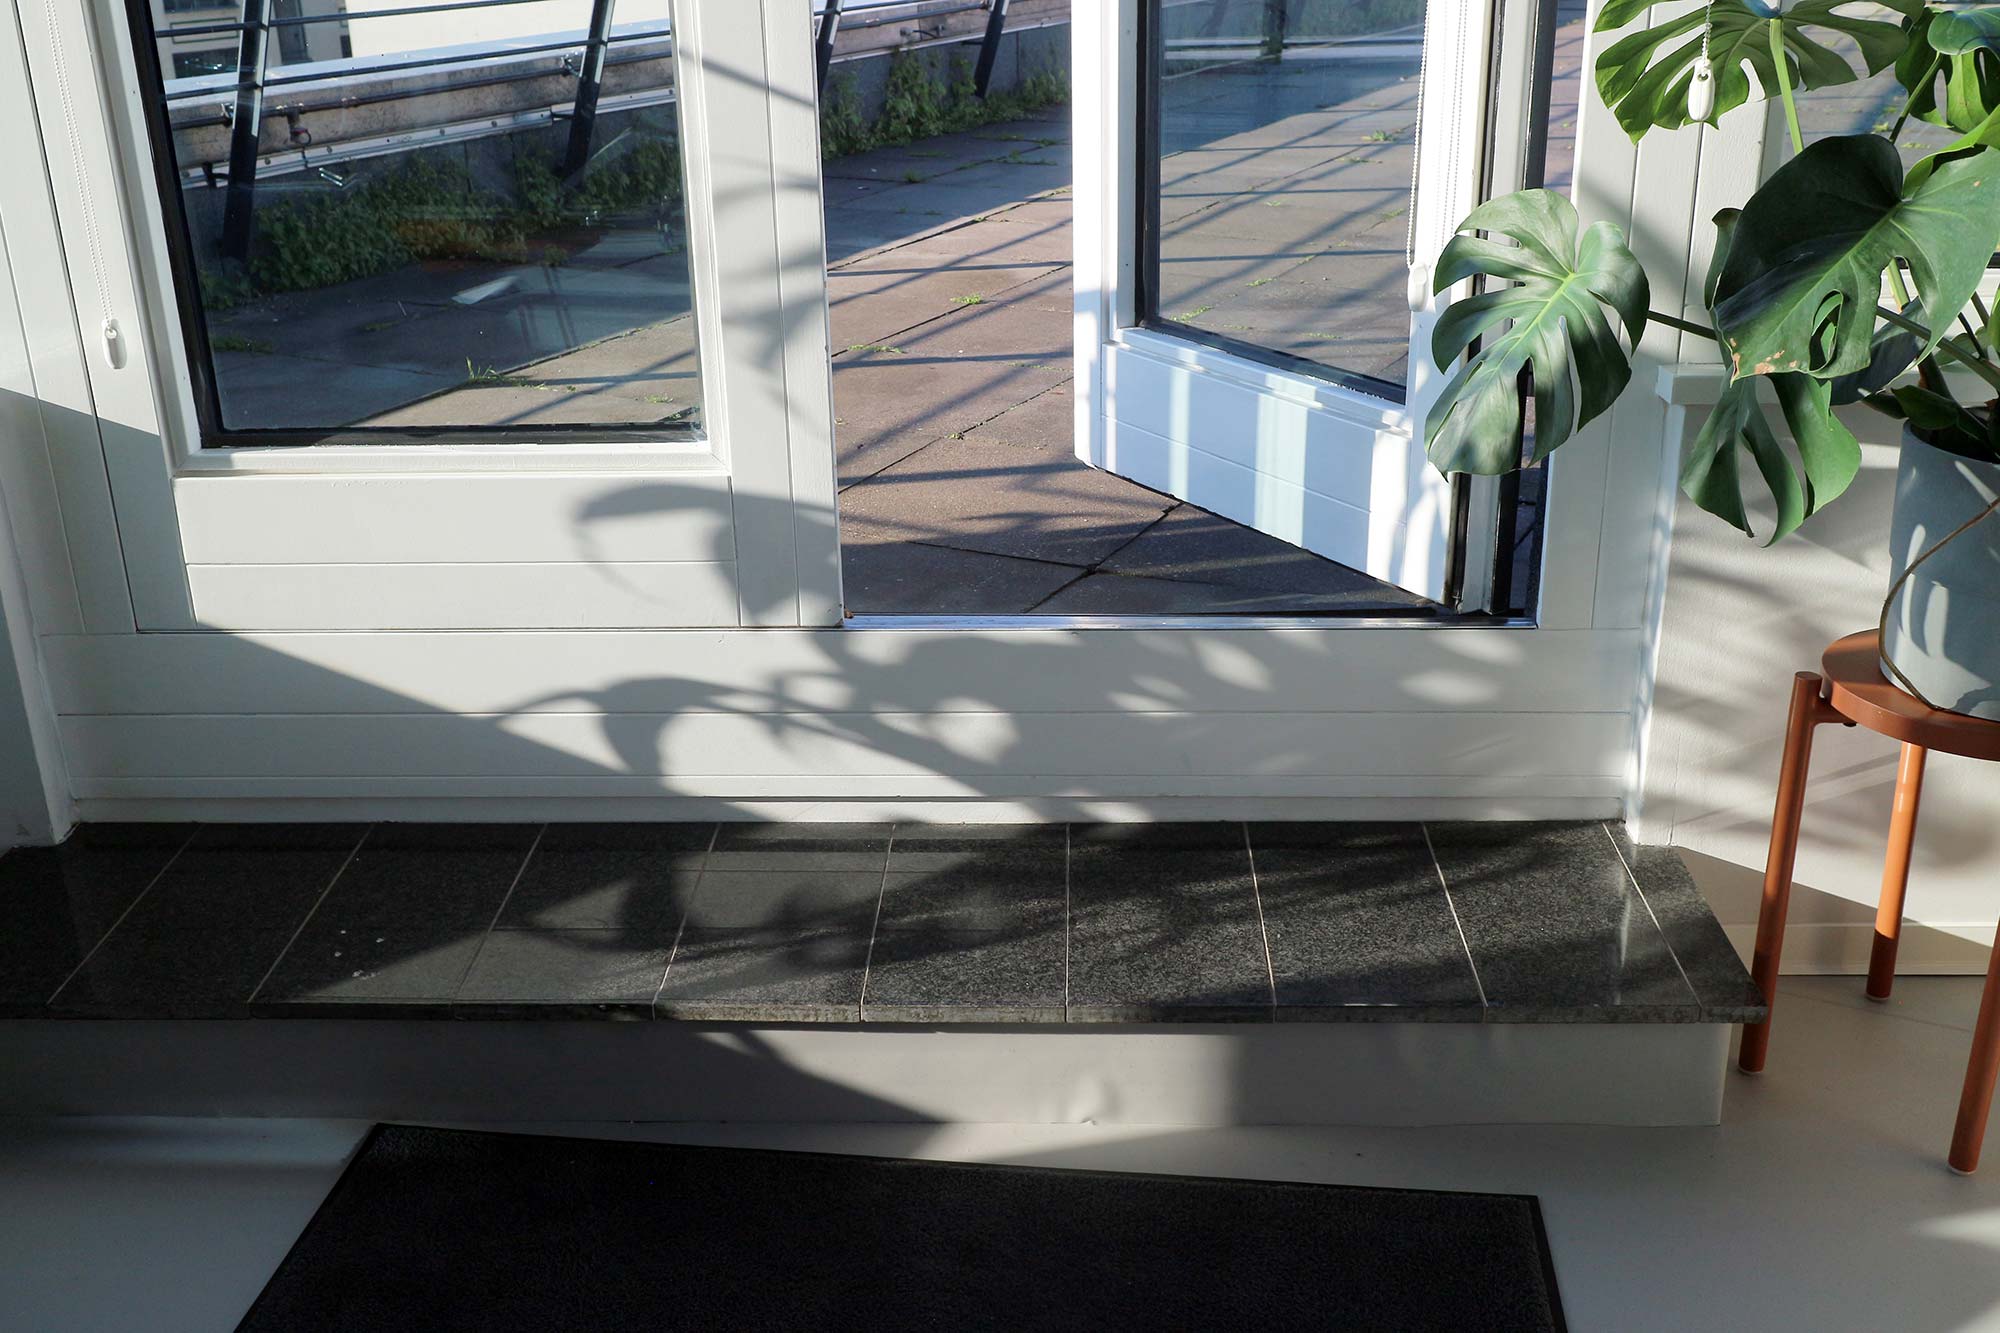 The exit to the roof terrace on the fourth floor that can be seen consists of two glass doors with a white frame, the right one is open; a doormat is inside and the step to the exit is tiled in black; to the right of the doors there is a green plant on a small wooden table